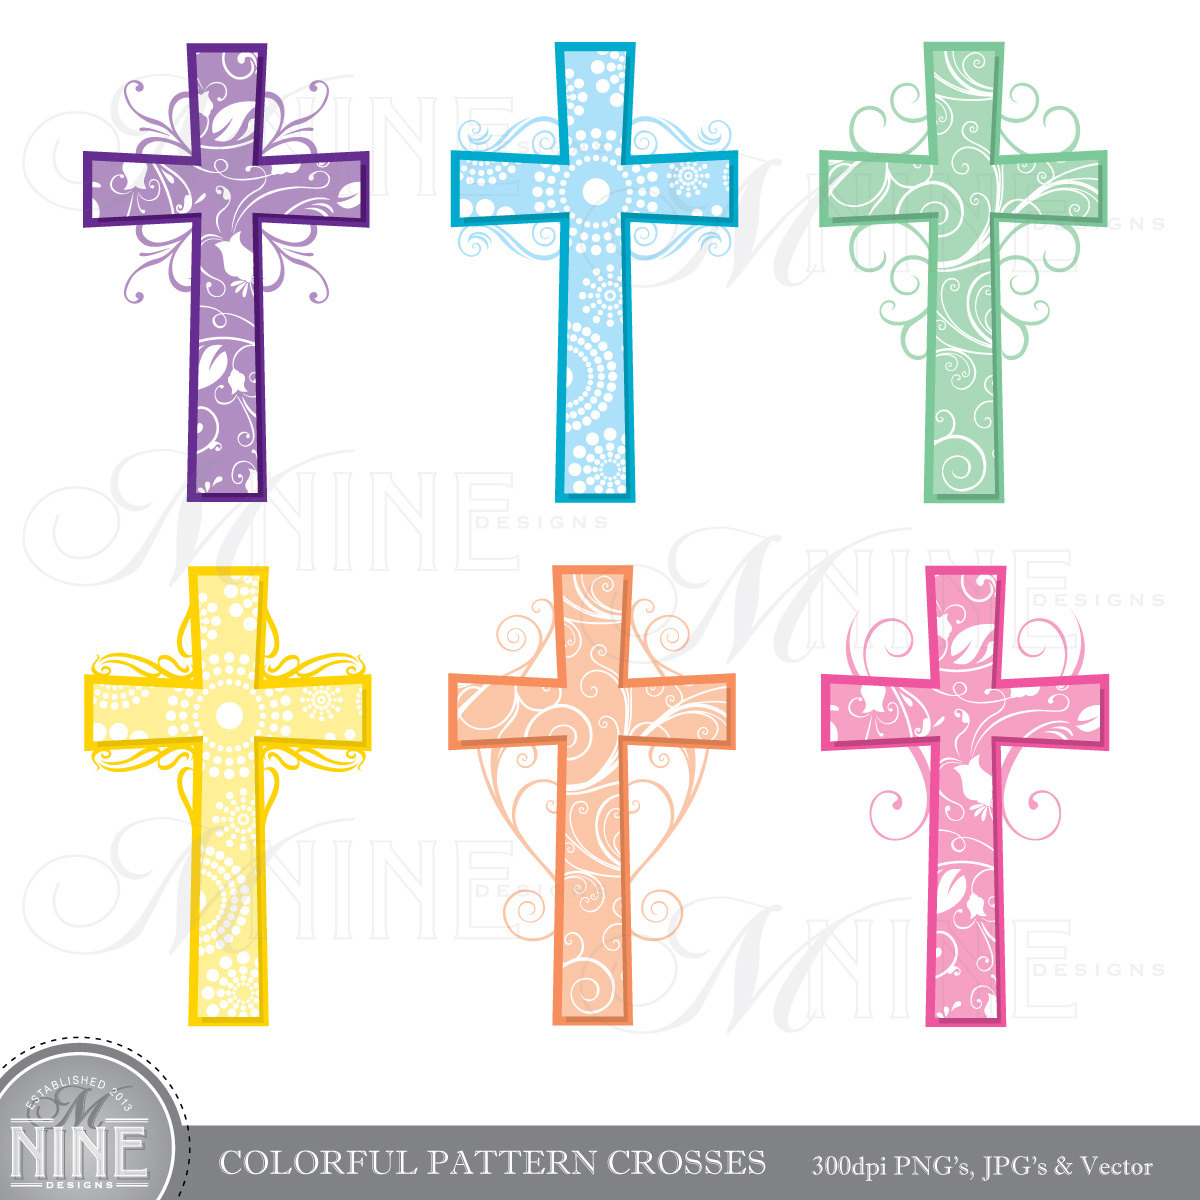 Cross Clip Art  Colorful Pattern Crosses Clipart By Mninedesigns